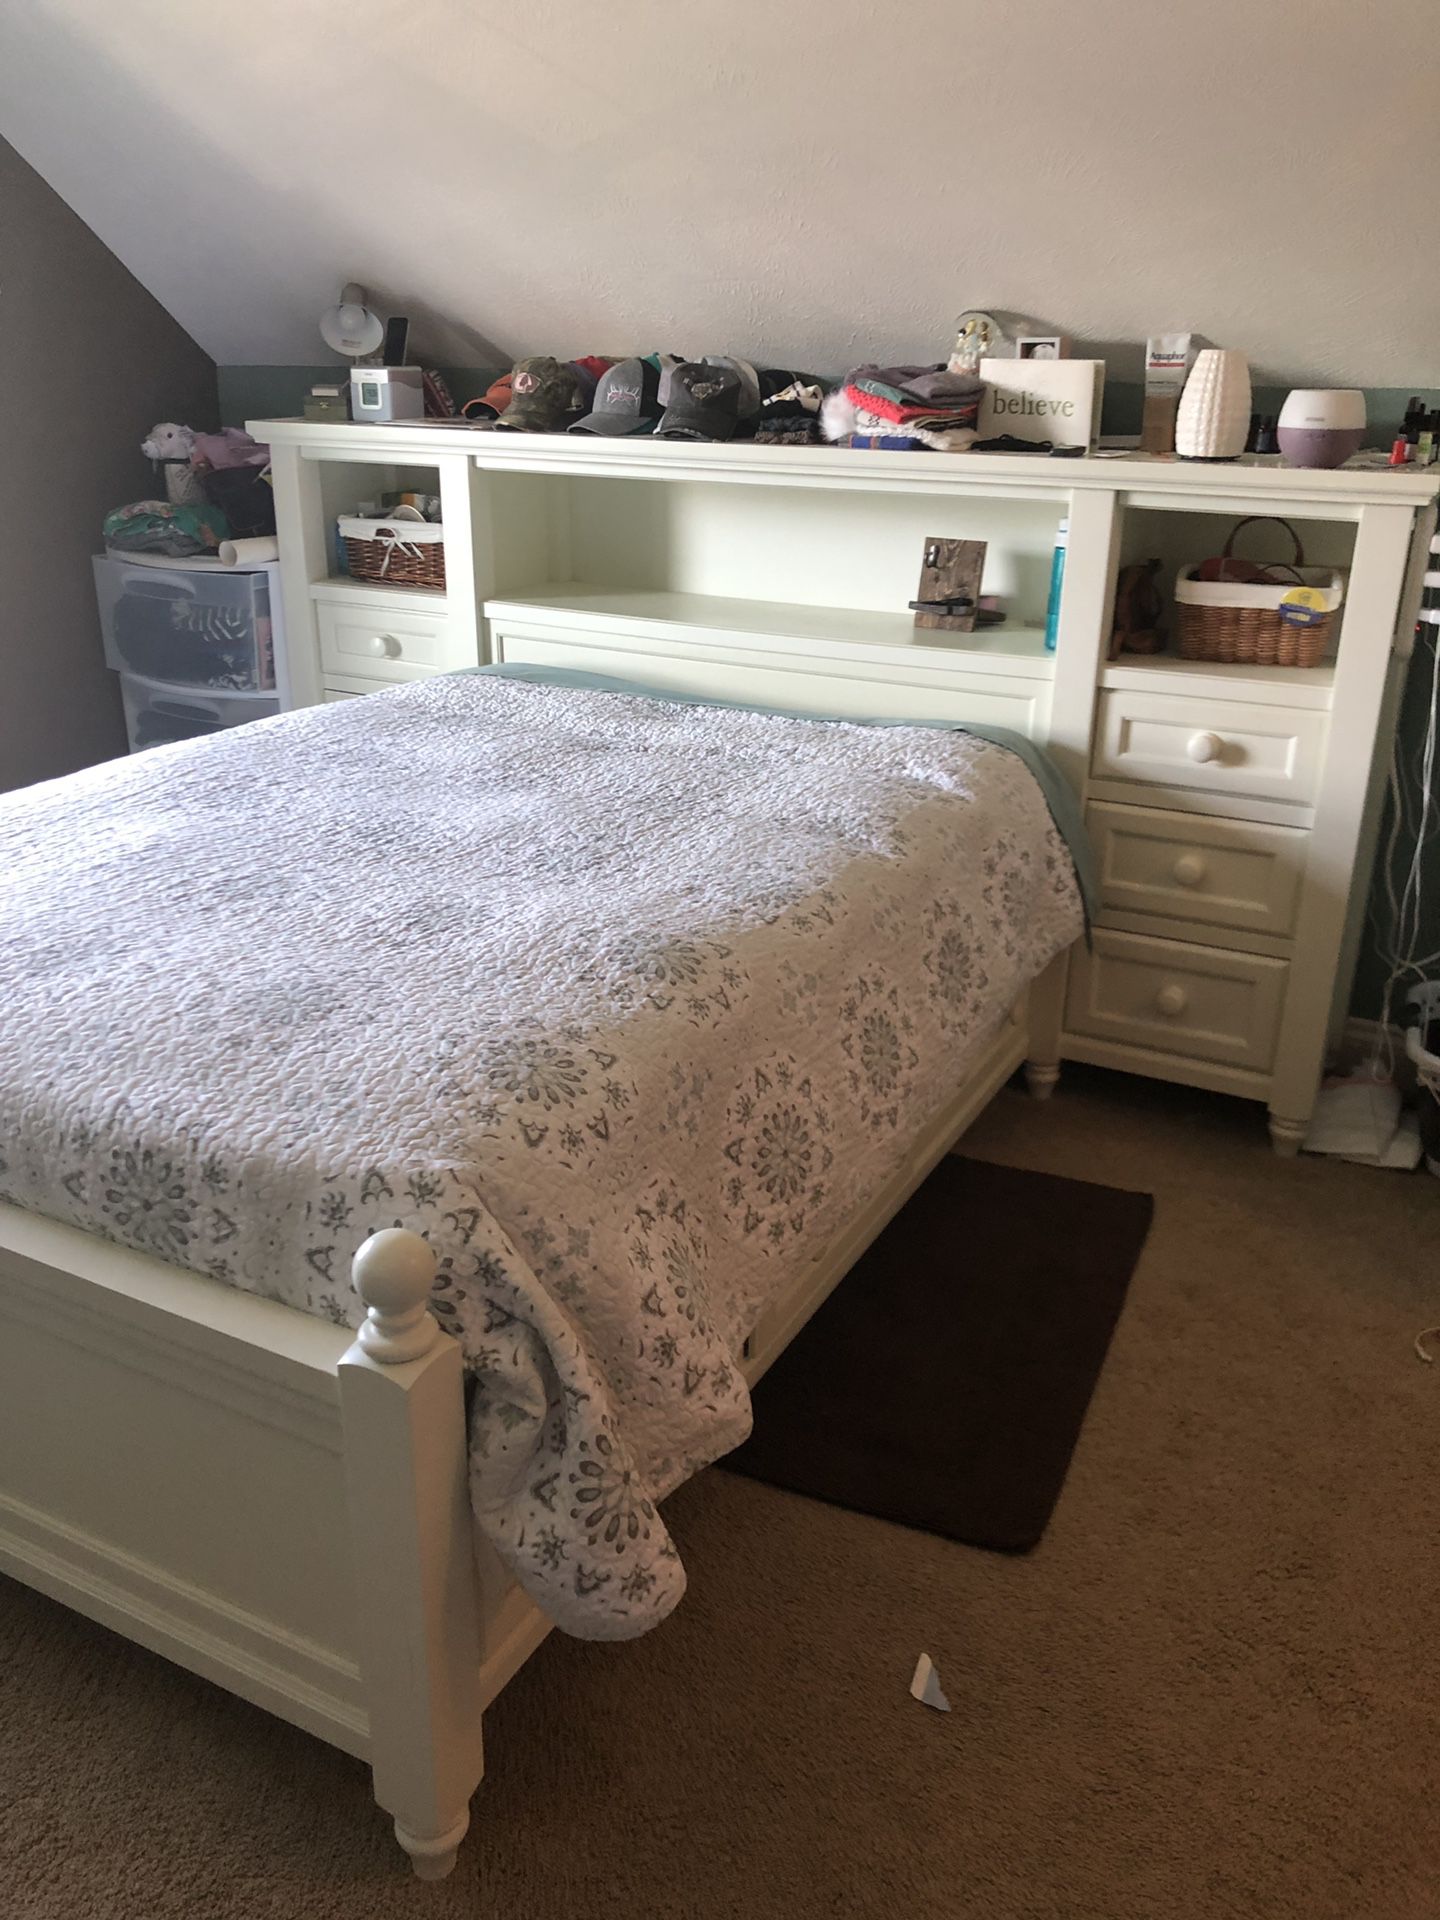 Pottery Barn bed frame